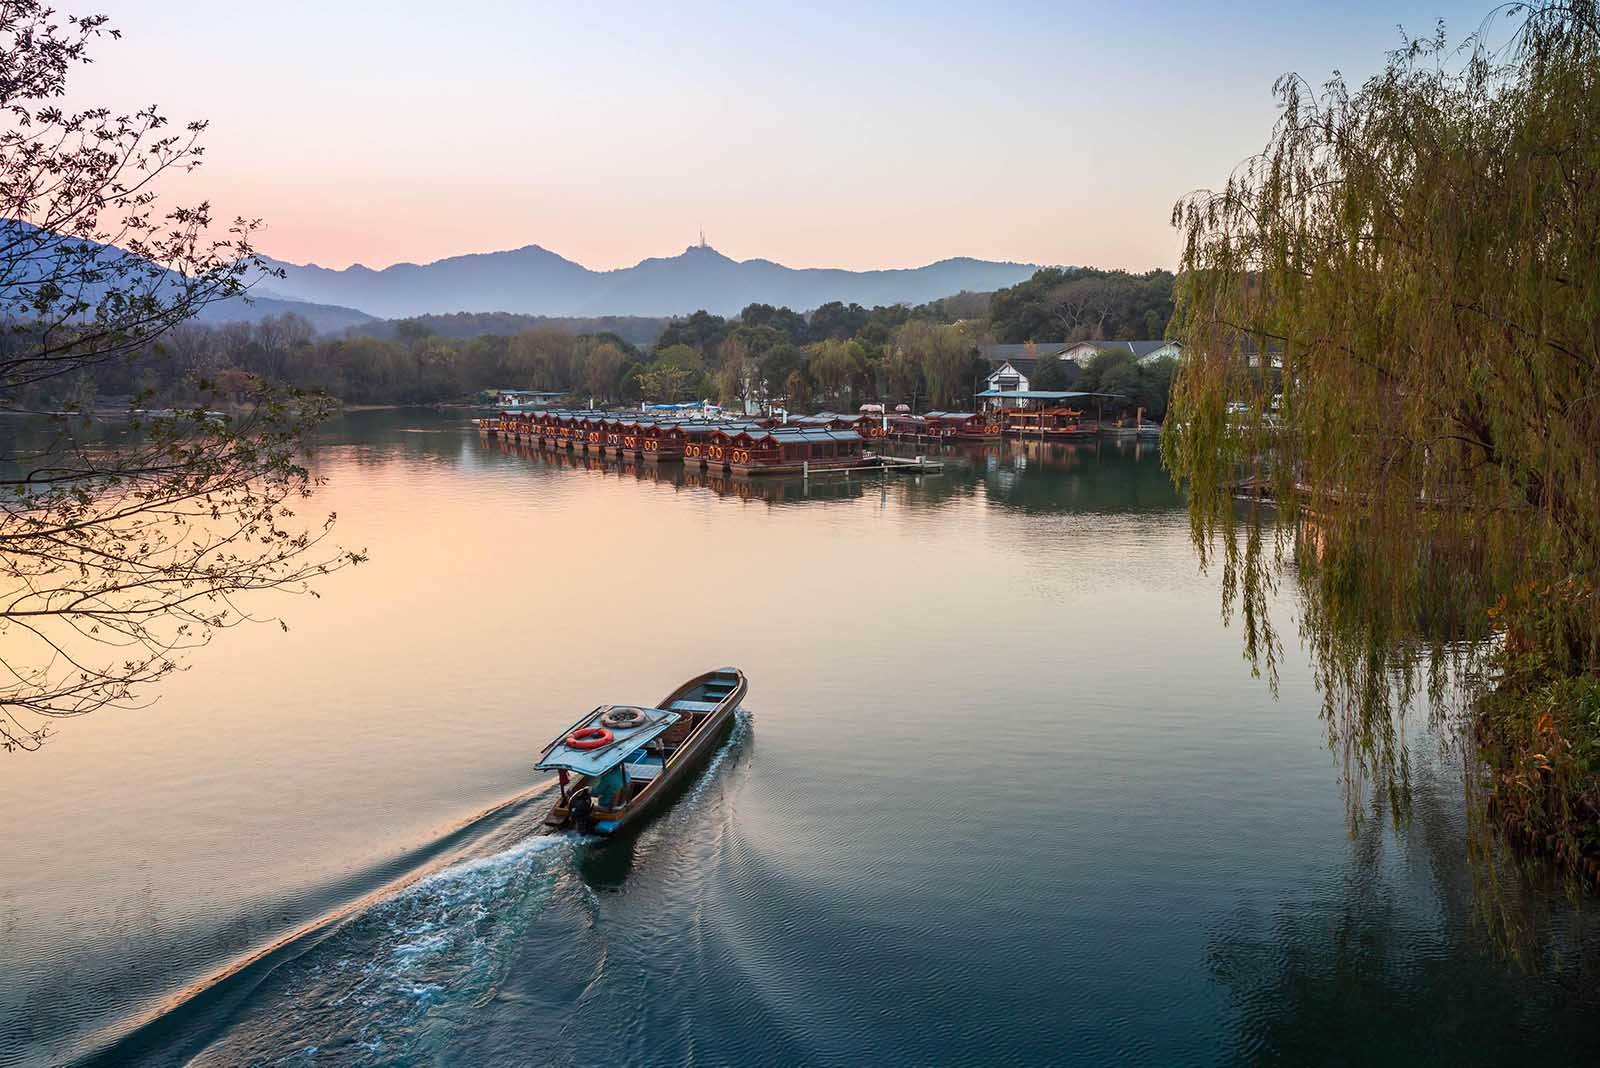 The dreamy lakes and waterways of Hangzhou have captured the attention of travellers from all over the world